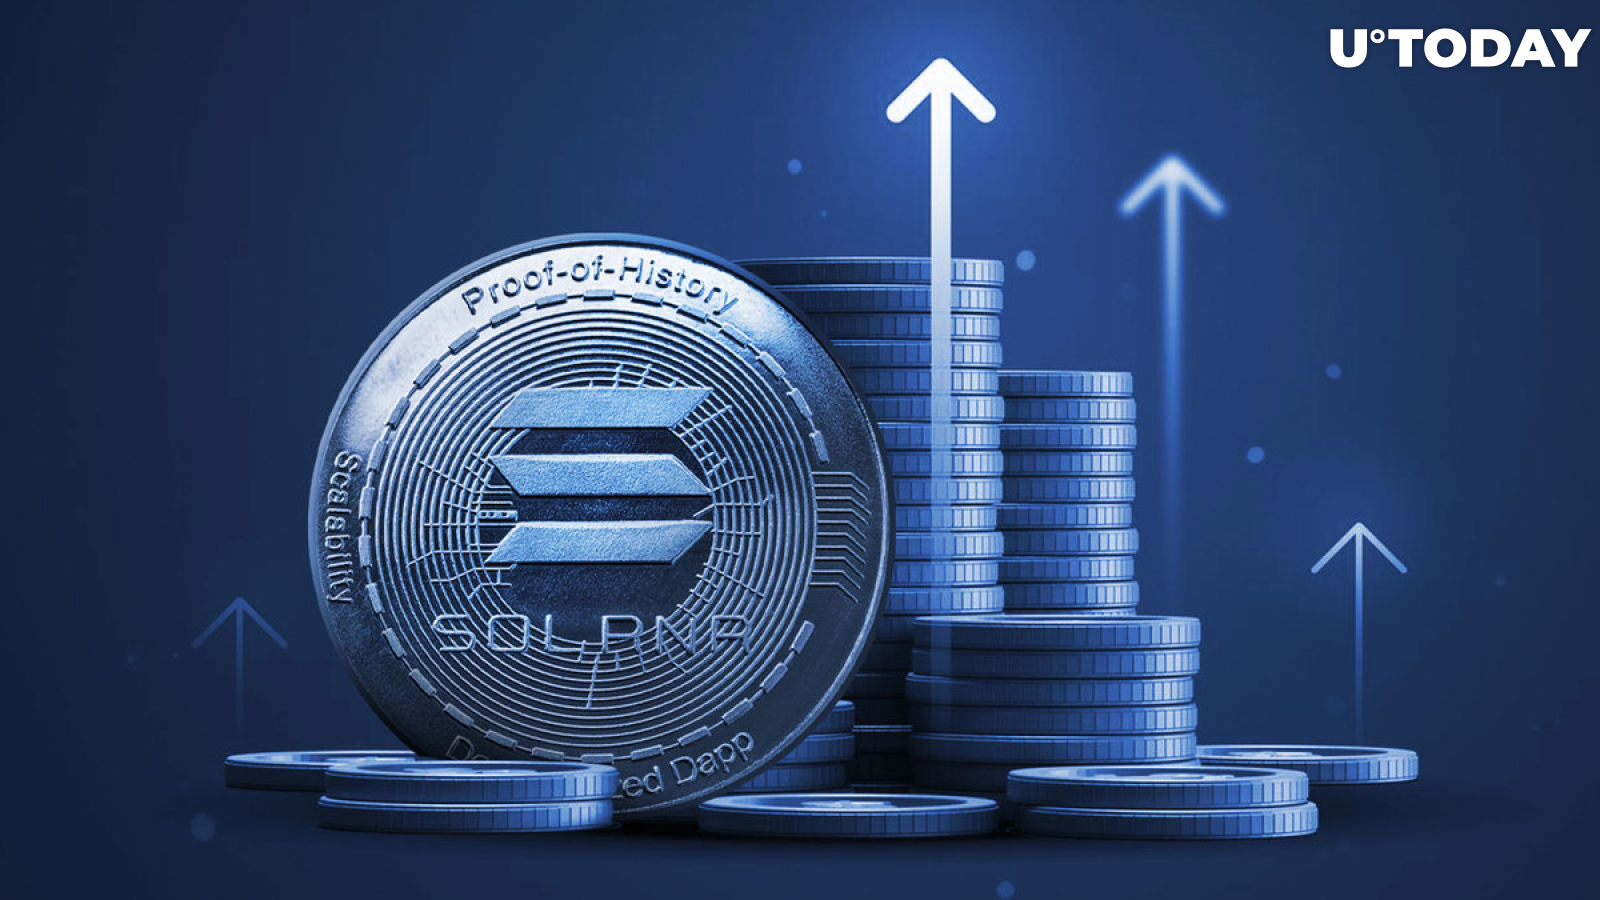 Solana (SOL) Exceeds Ethereum L2s by Trading Volume, Data Says